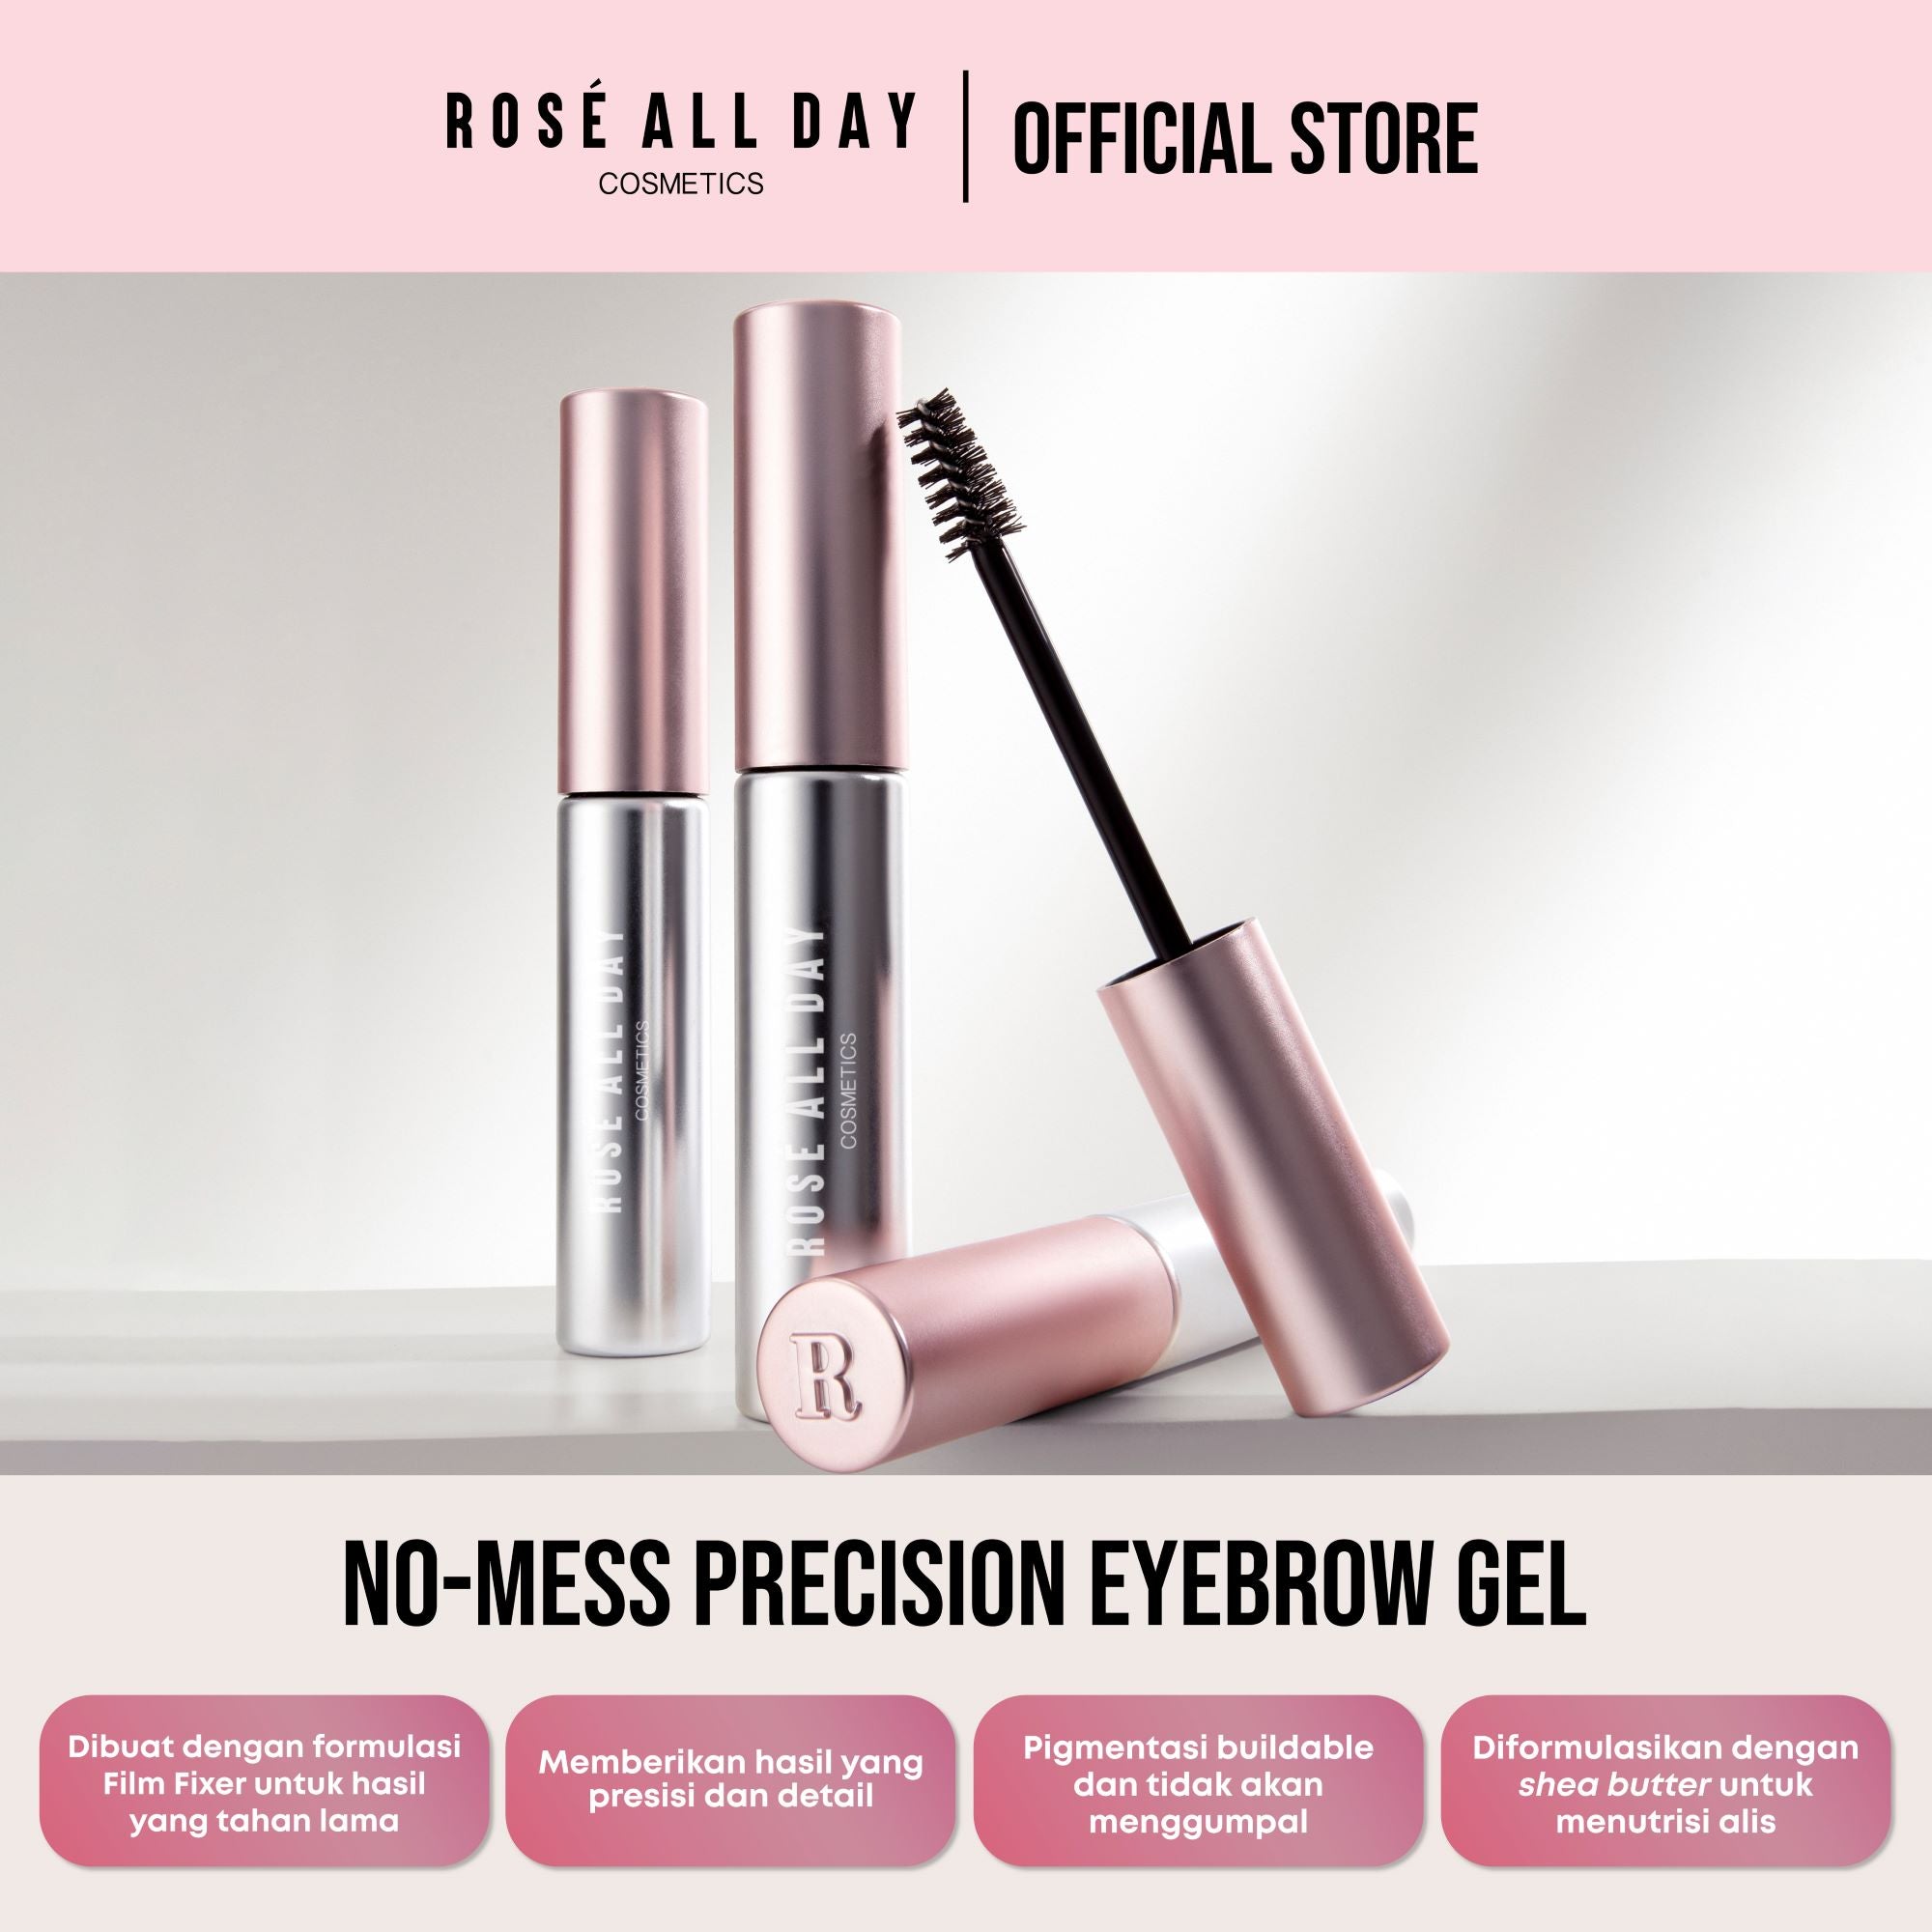 [NEW] Rosé All Day Brow Fix Gel